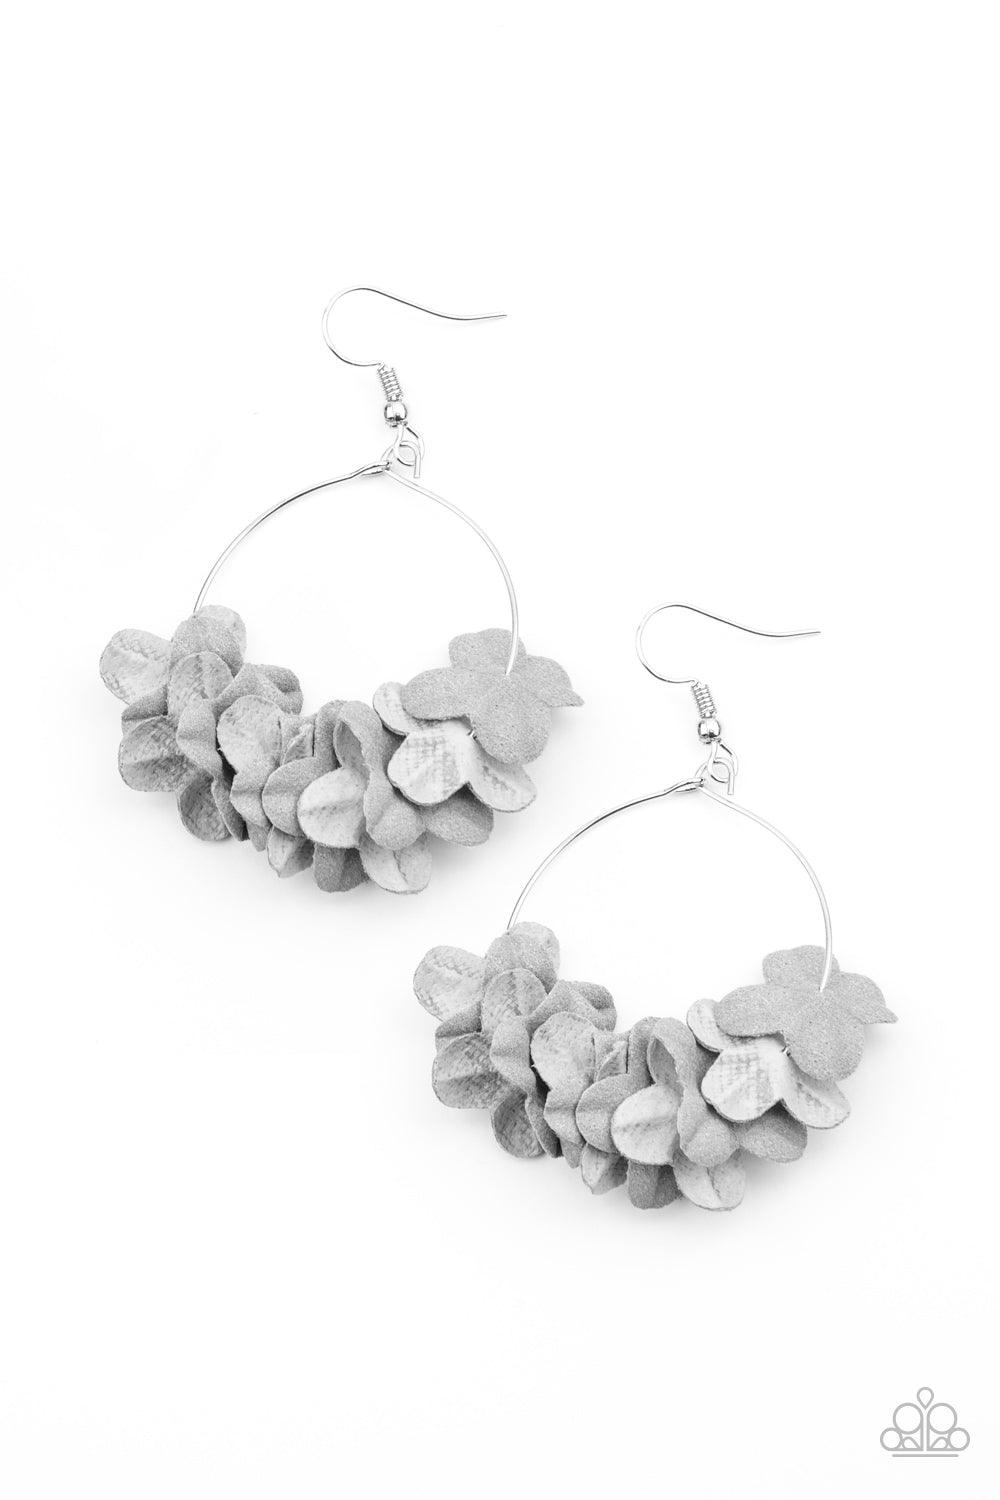 Paparazzi Accessories Flirty Florets - Silver A collection of gray paper-like flowers are threaded along a dainty silver hoop, creating a flirtatious floral fringe. Earring attaches to a standard fishhook fitting. Sold as one pair of earrings. Jewelry